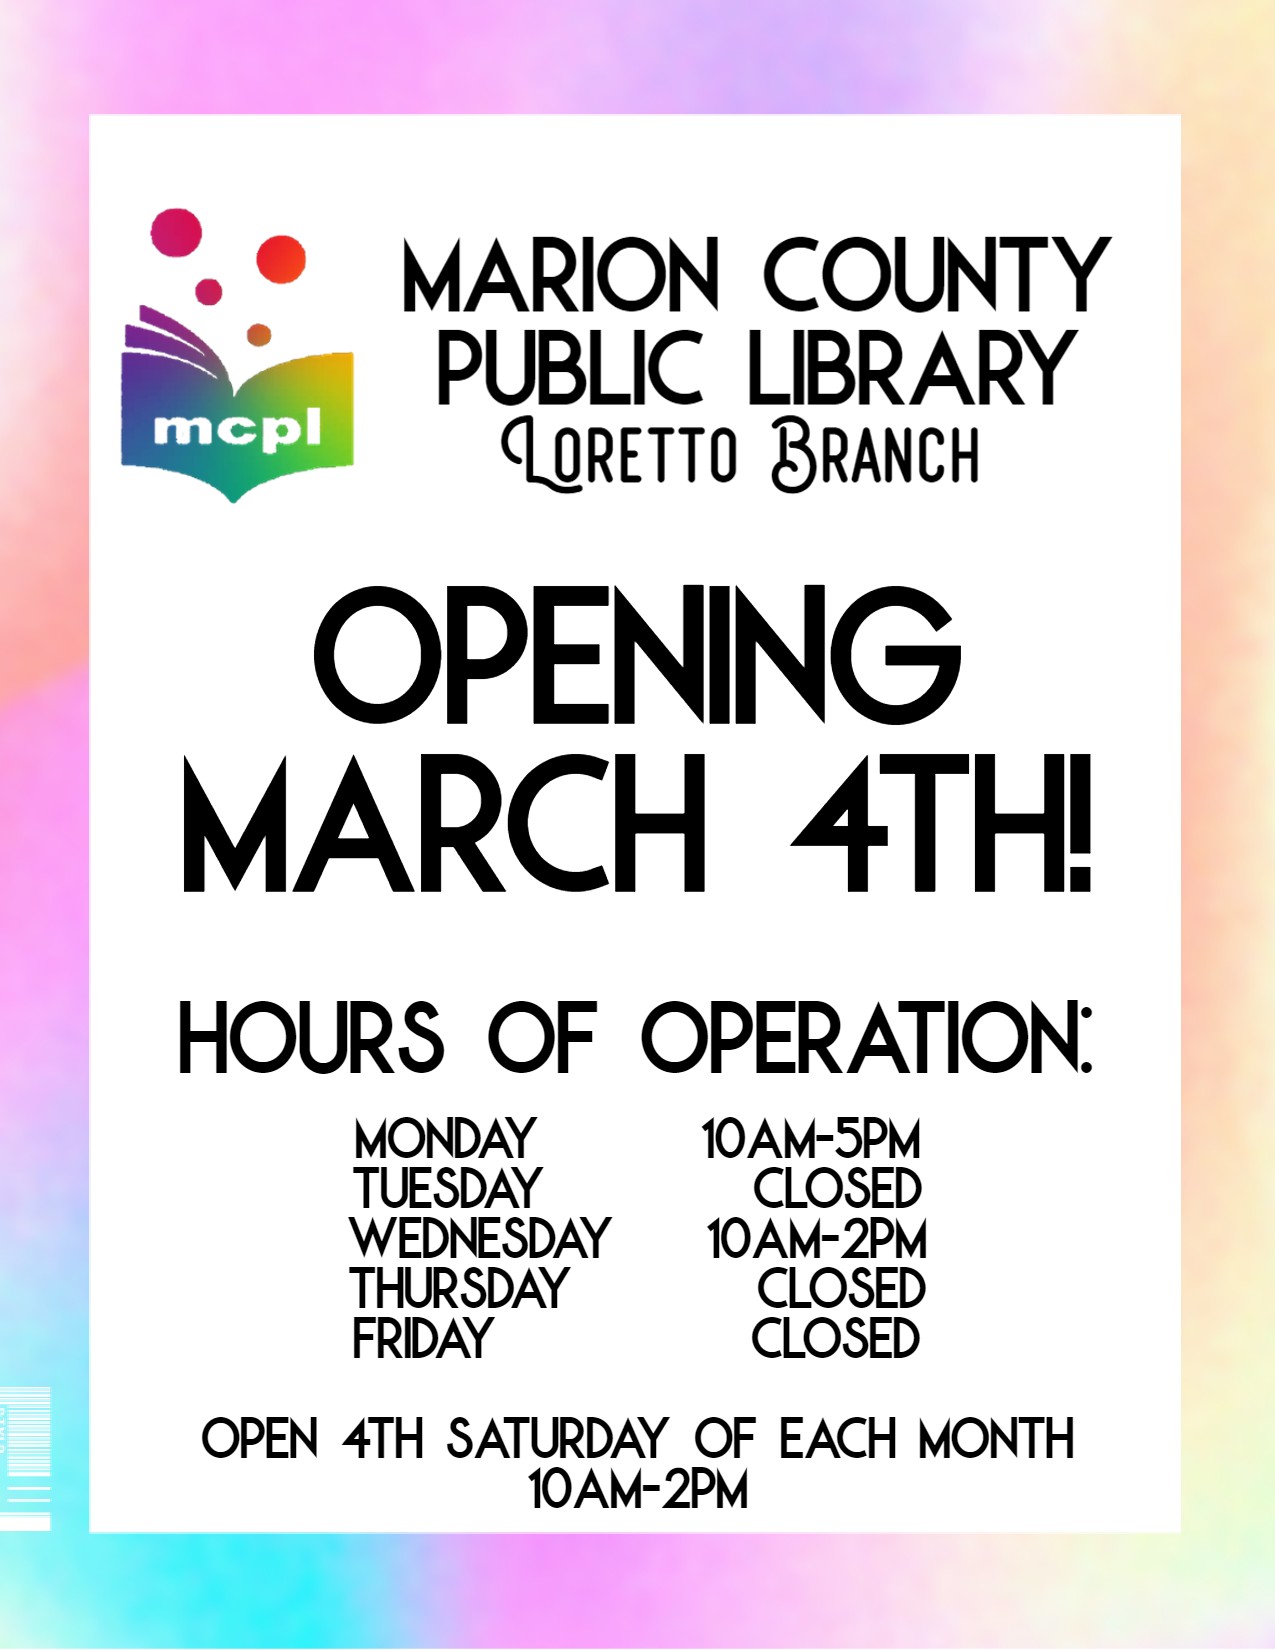 Marion County Public Library Loretto Branch now open